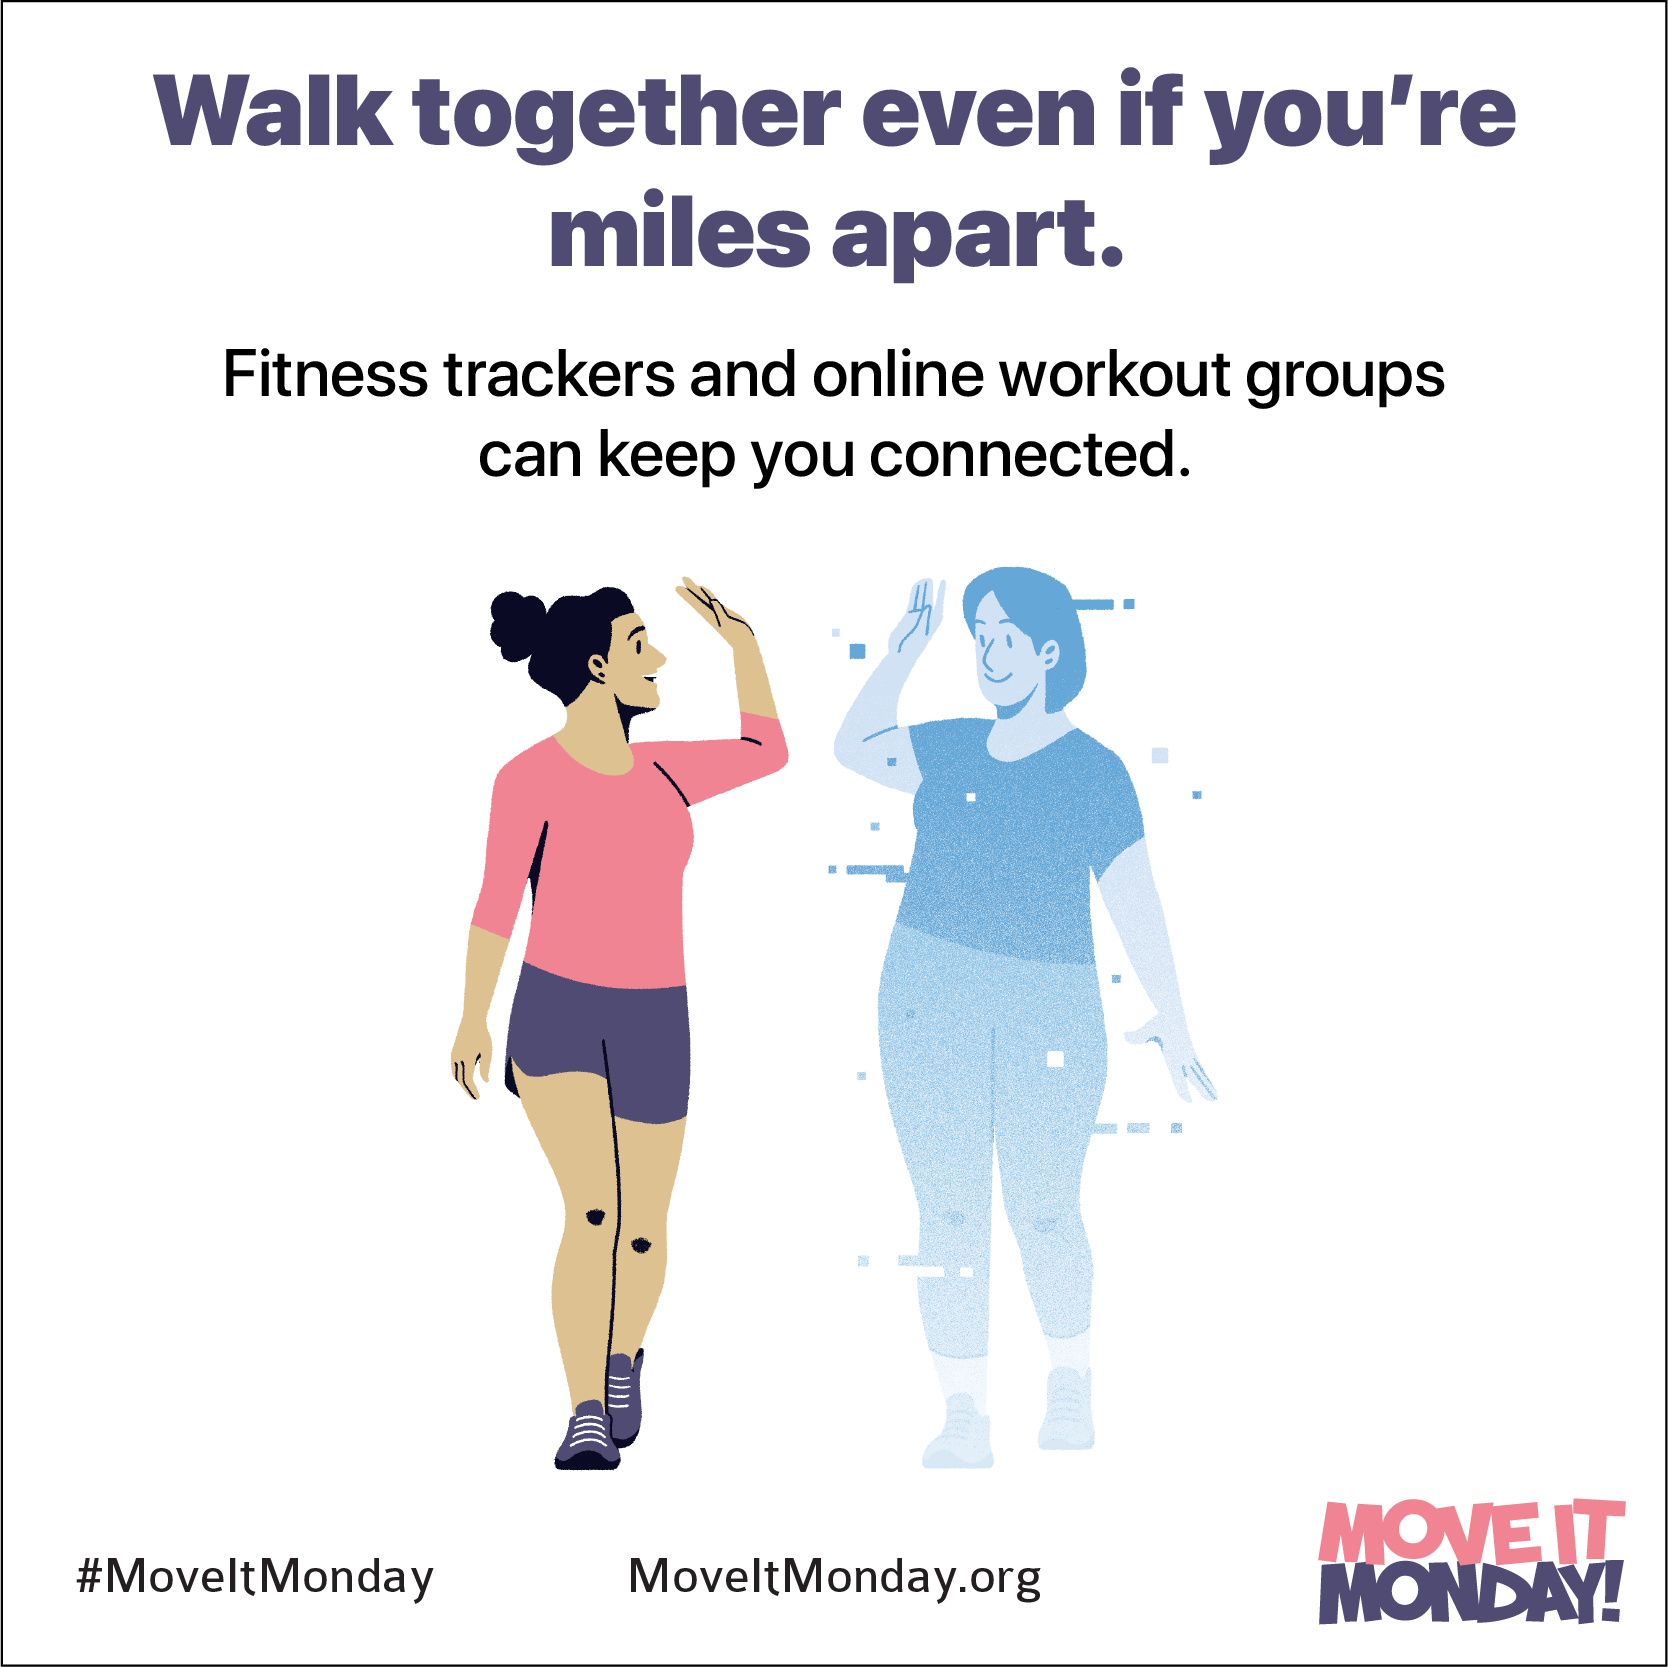 Walk together even if you're miles apart. Fitness trackers and online workout groups can keep you connected.